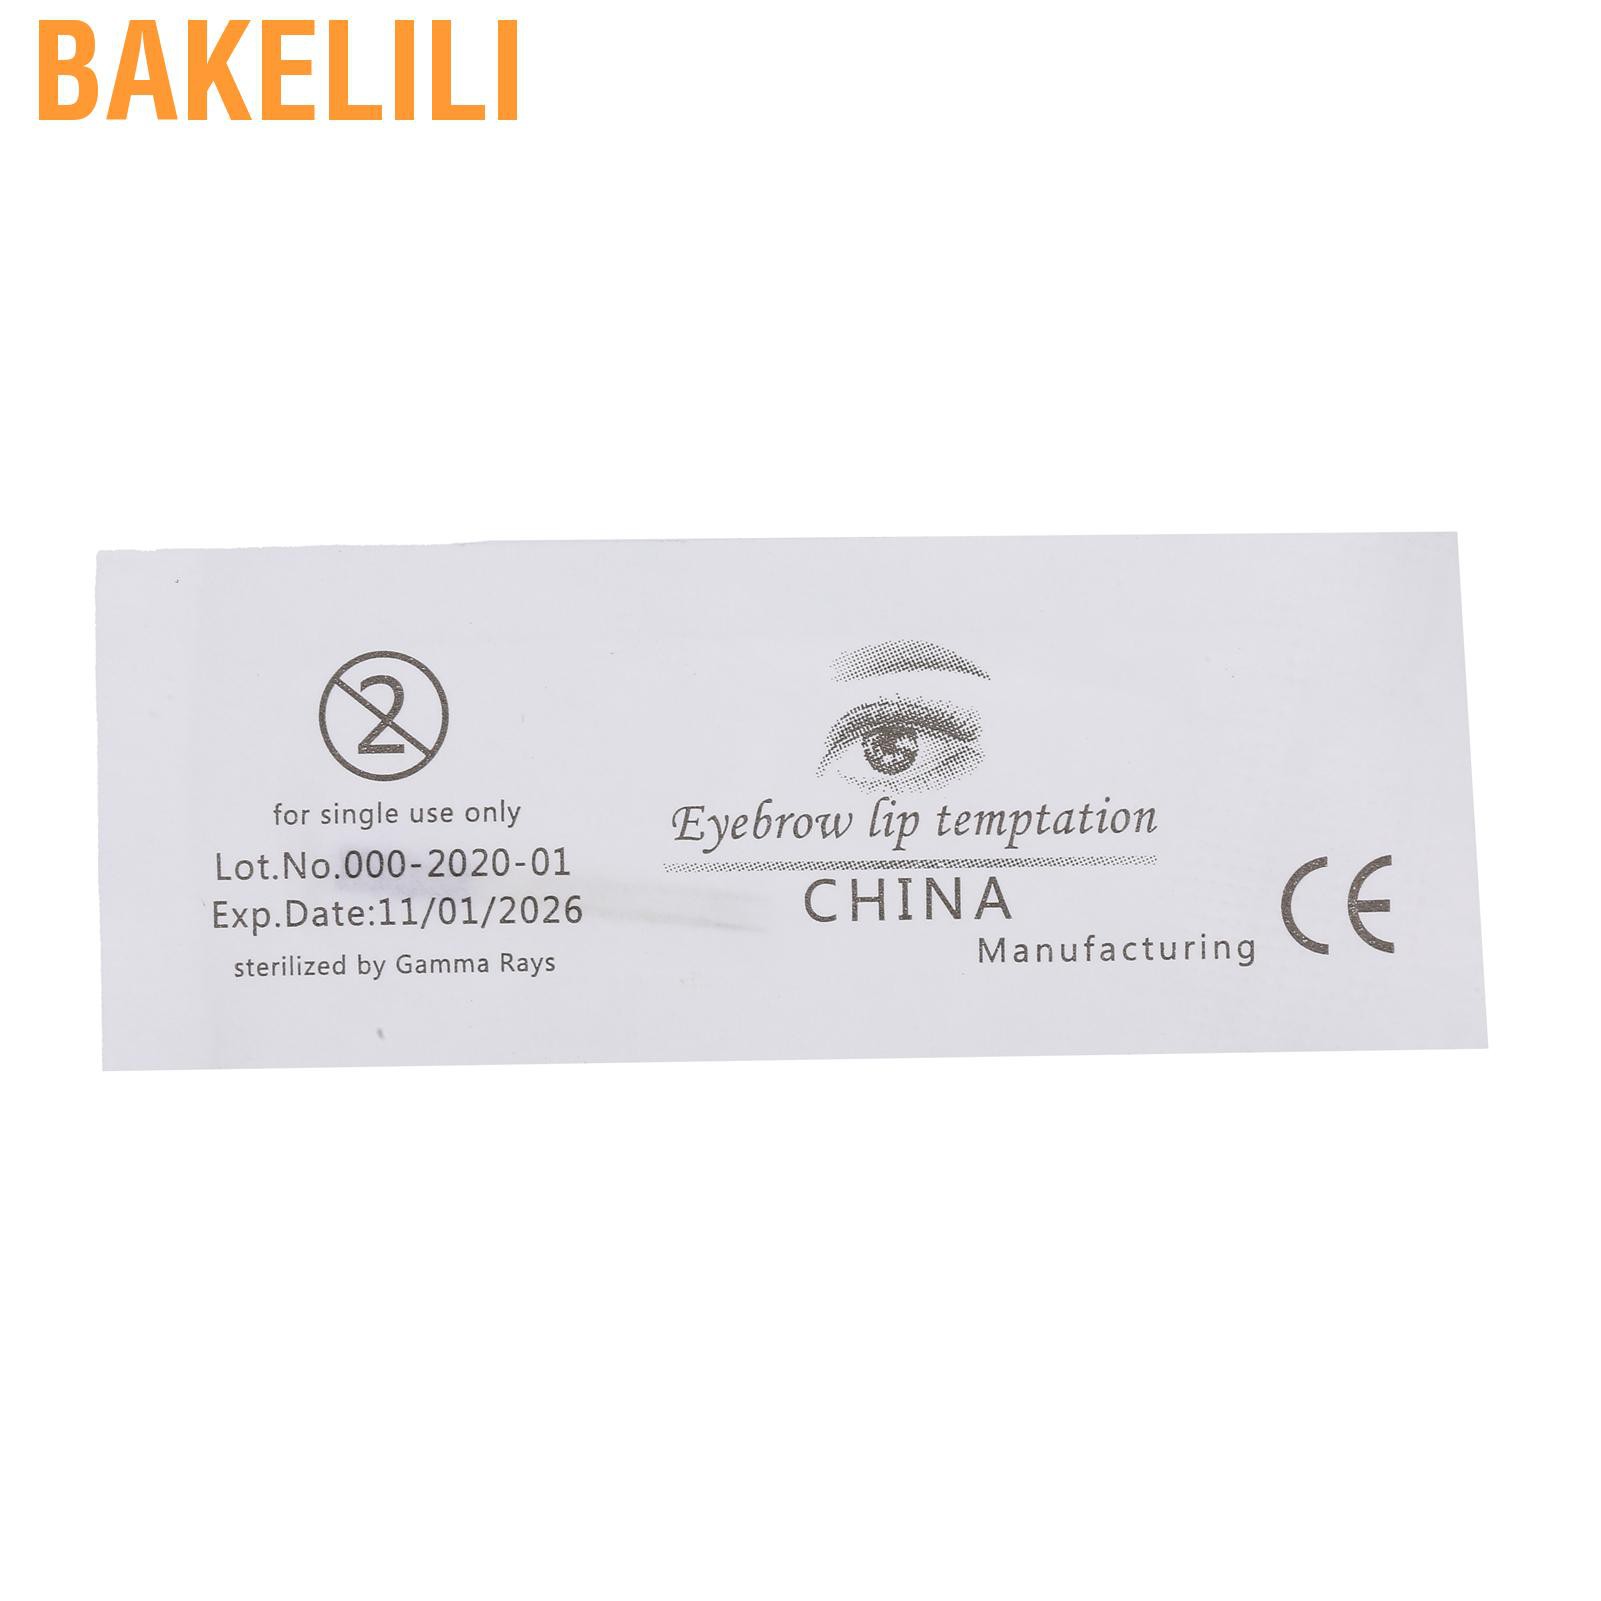 Bakelili Microblading Accessory  Professional Needle Fast Coloring Eyebrow Shader Tattoo (3 x 3R)